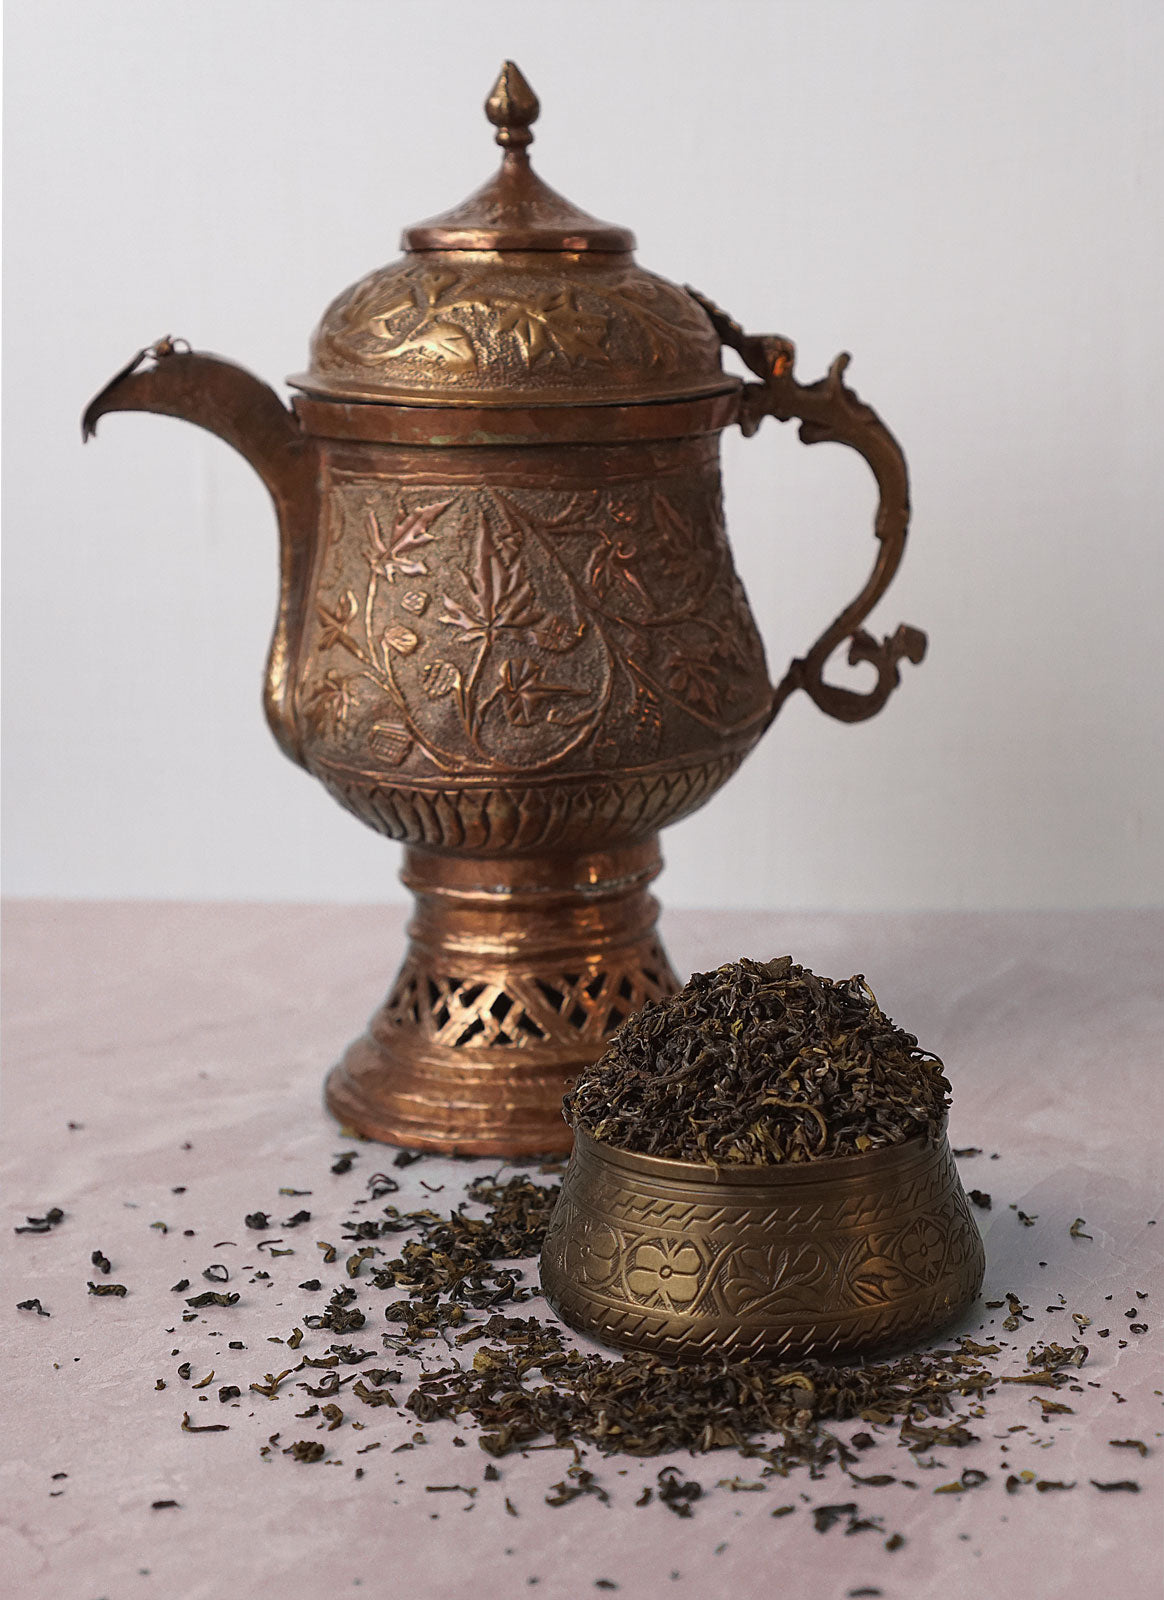 Antique copper tea pot and cup with scattered loose leaf pure darjeeling tea.